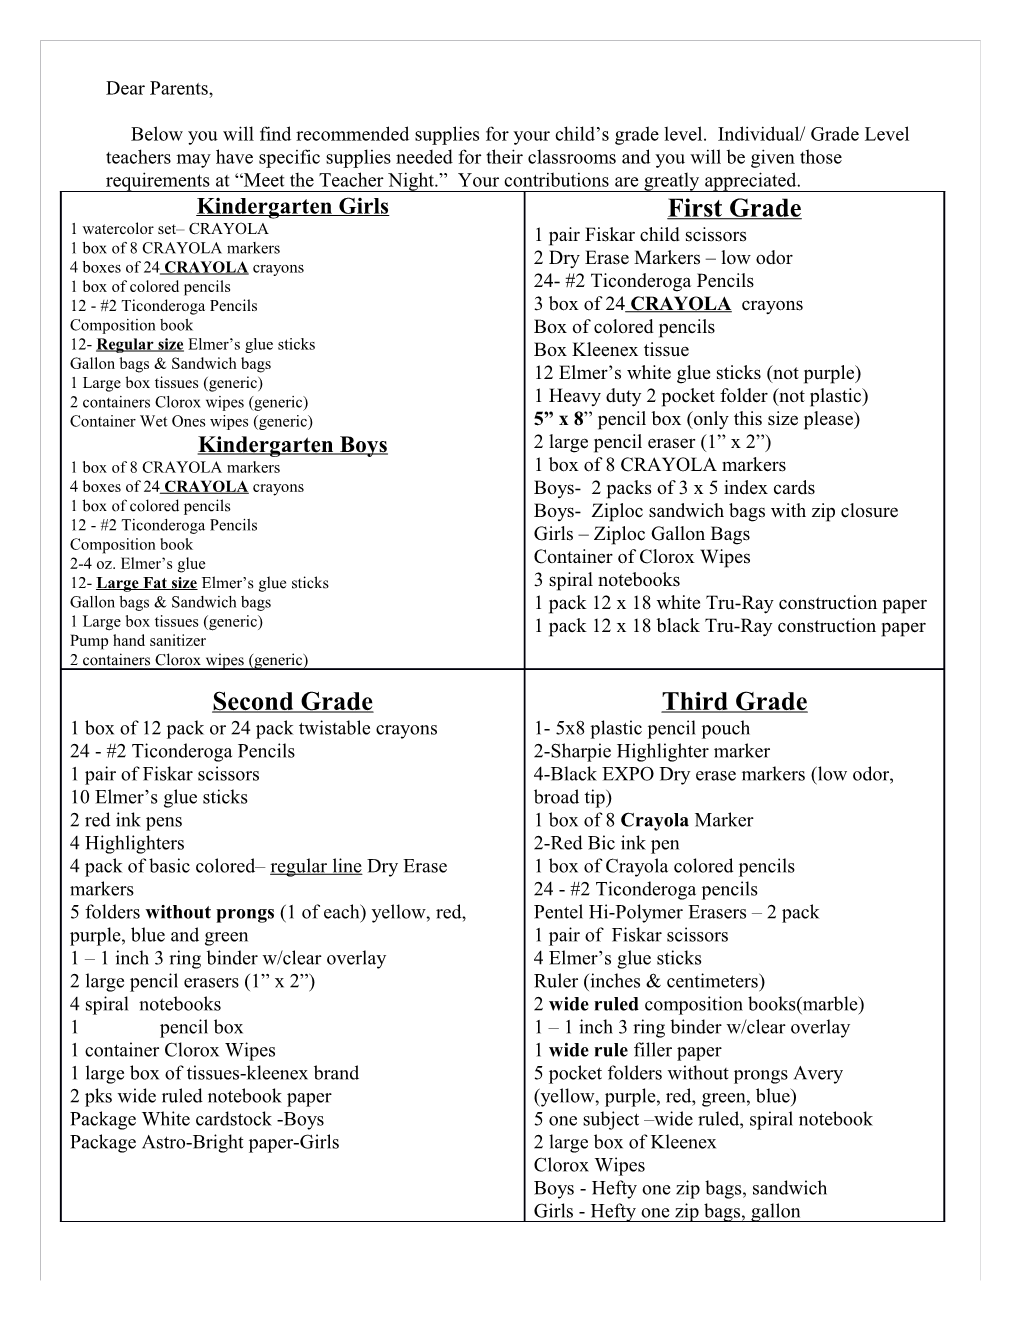 Below You Will Find Recommended Supplies for Your Child S Grade Level. Individual/ Grade